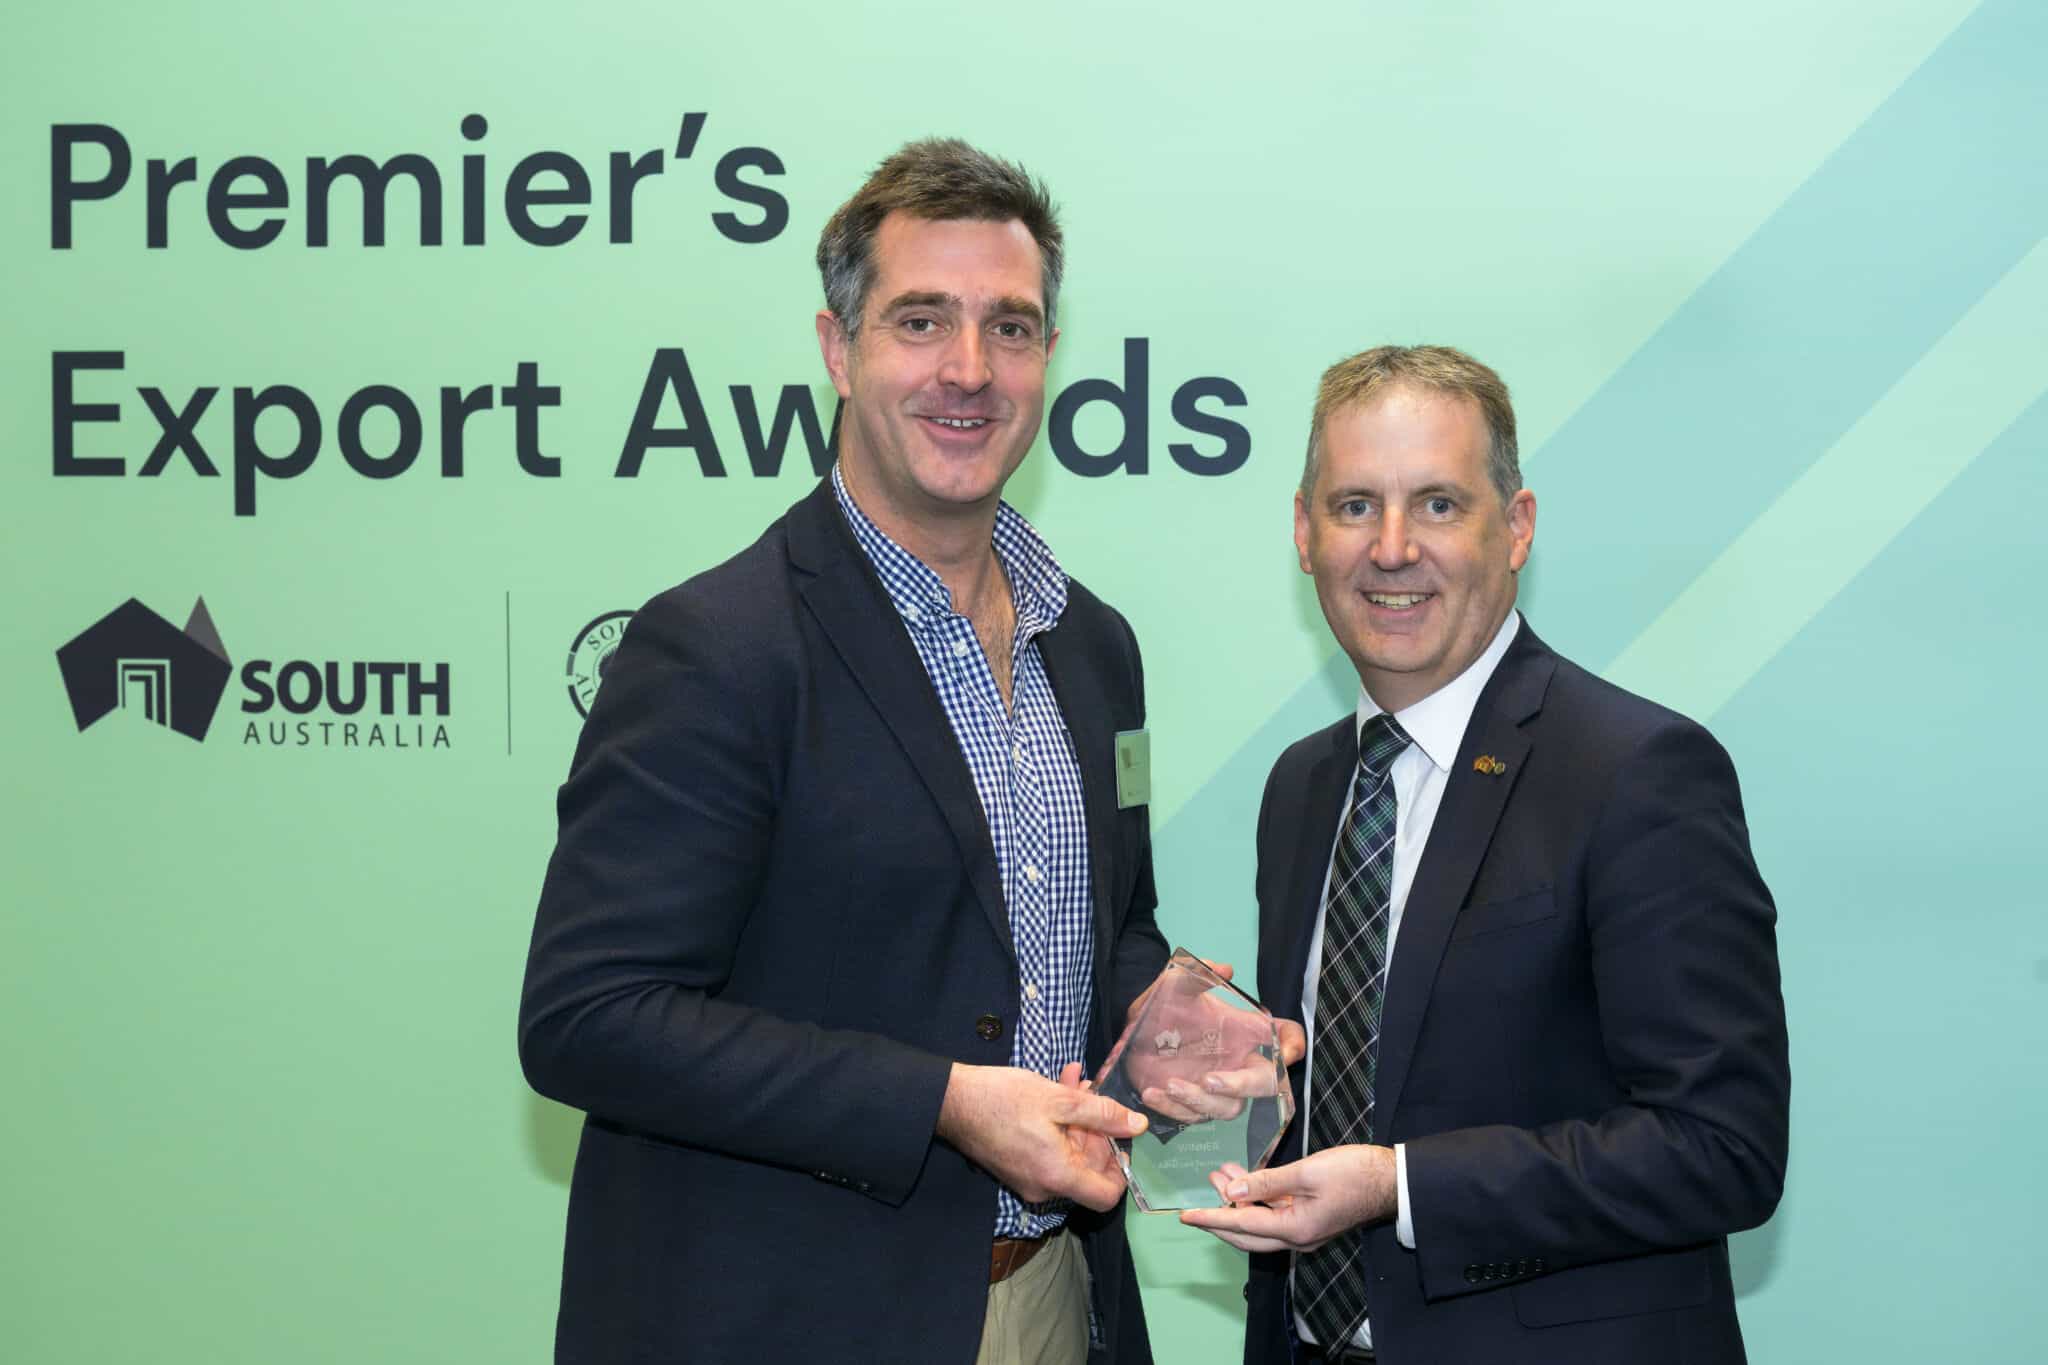 Dr. Brenton Cooper received the Premier's Export Award from David Reynolds - CEO of the Department for Trade and Investment at The Government of South Australia